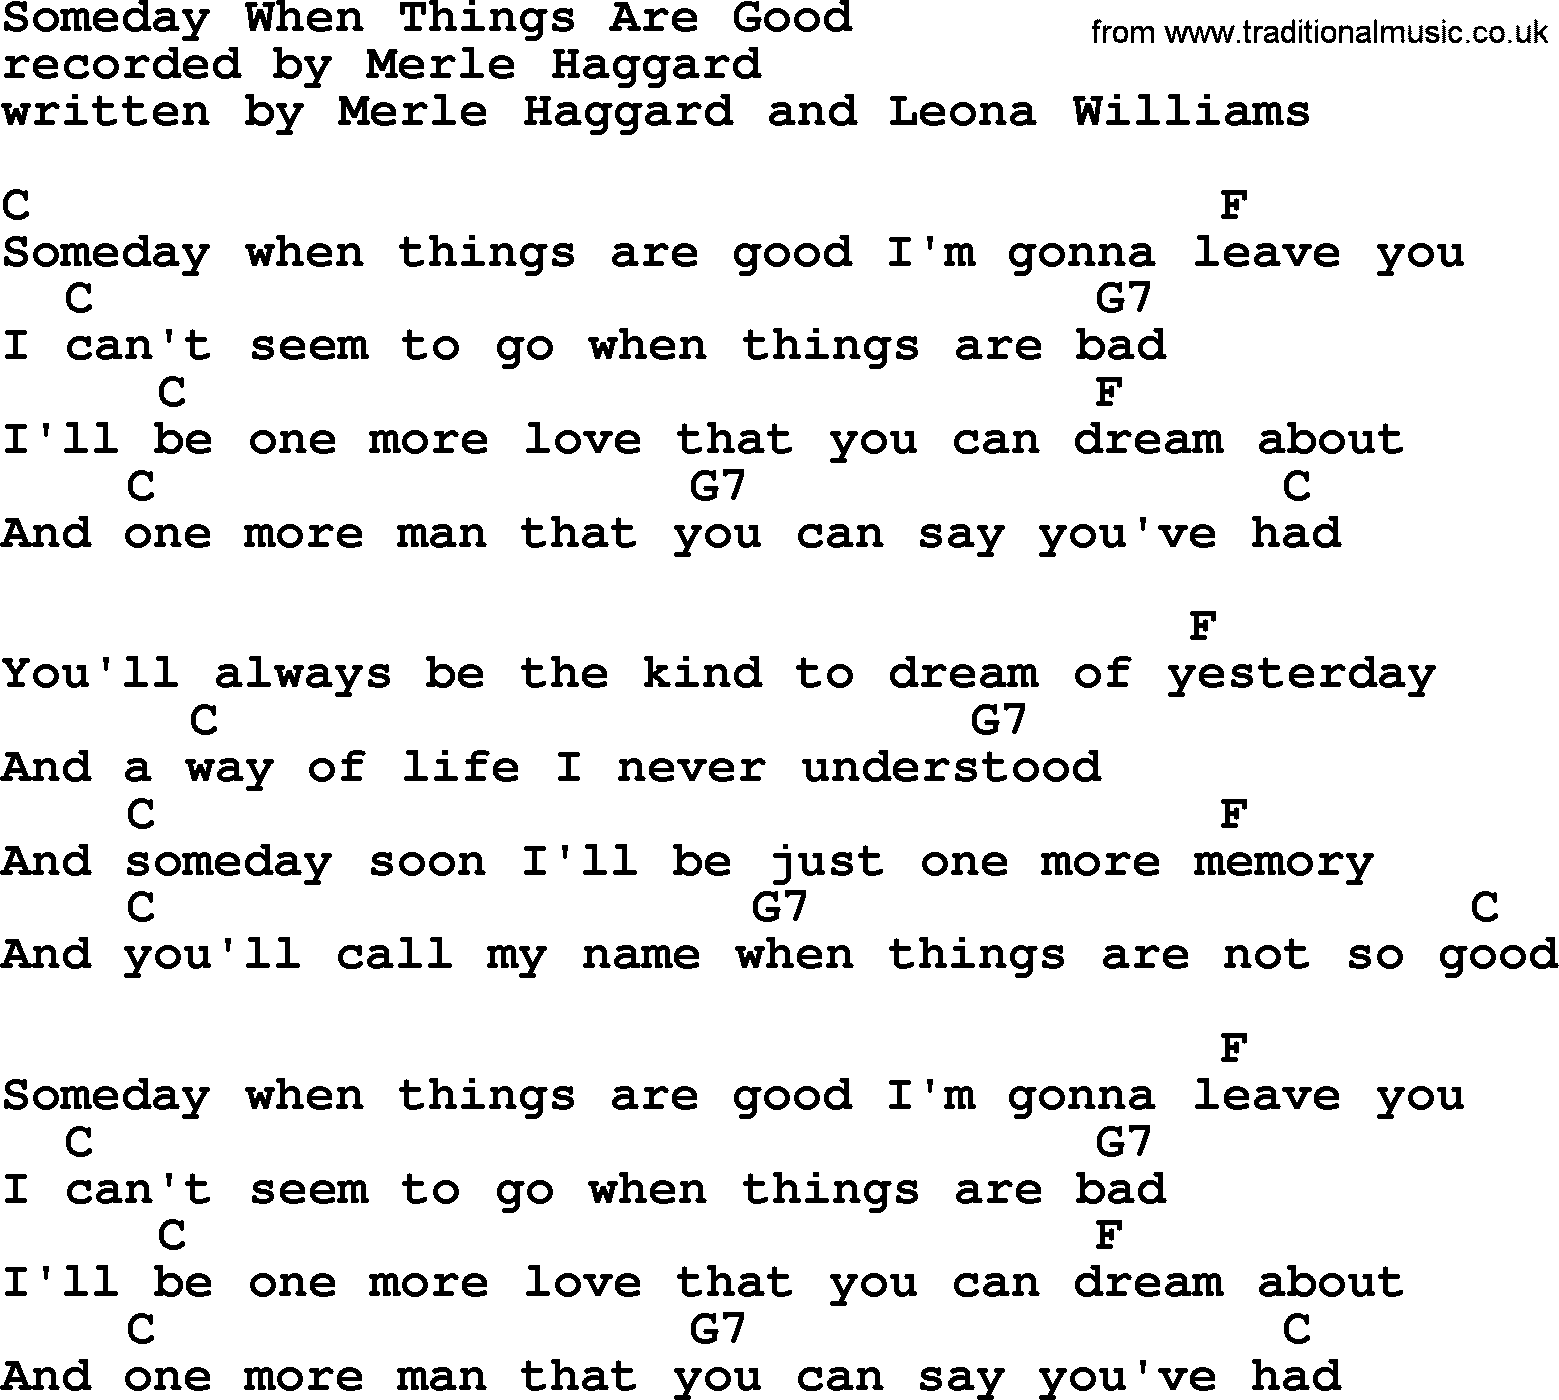 Merle Haggard song: Someday When Things Are Good, lyrics and chords